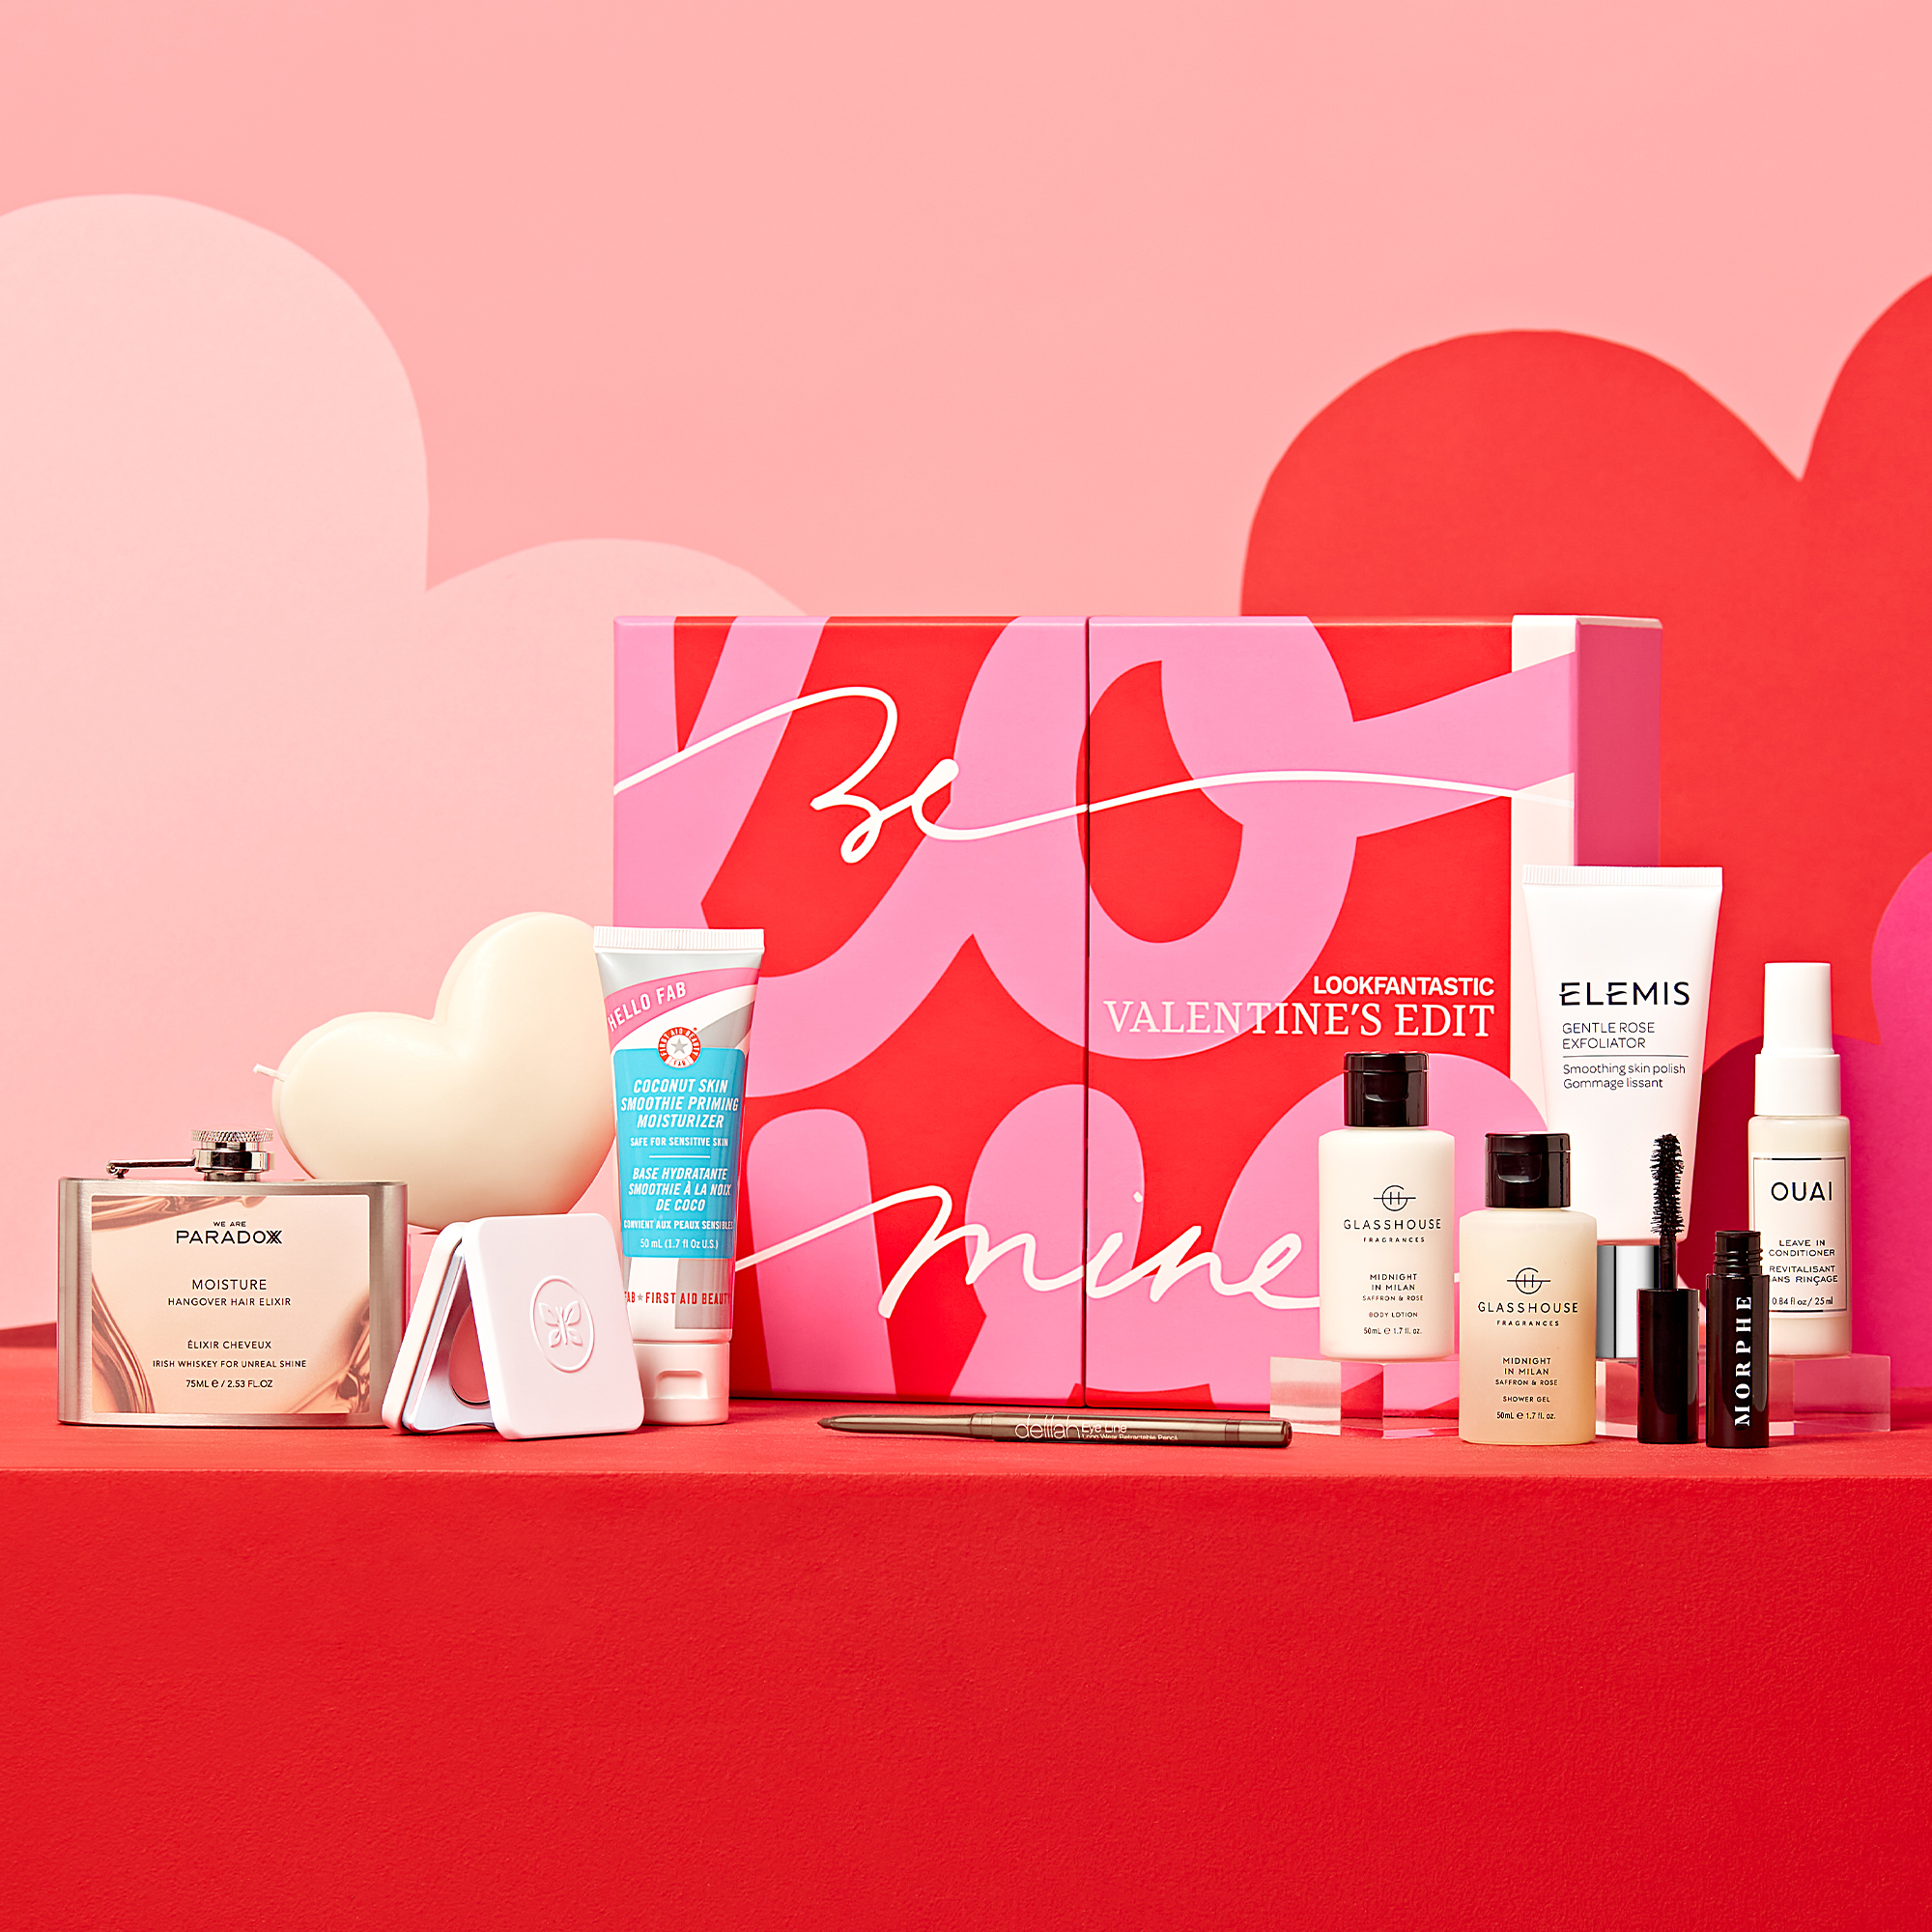 The Look Fantastic Valentine's Edit. Box and its contents in a pink and red studio setting